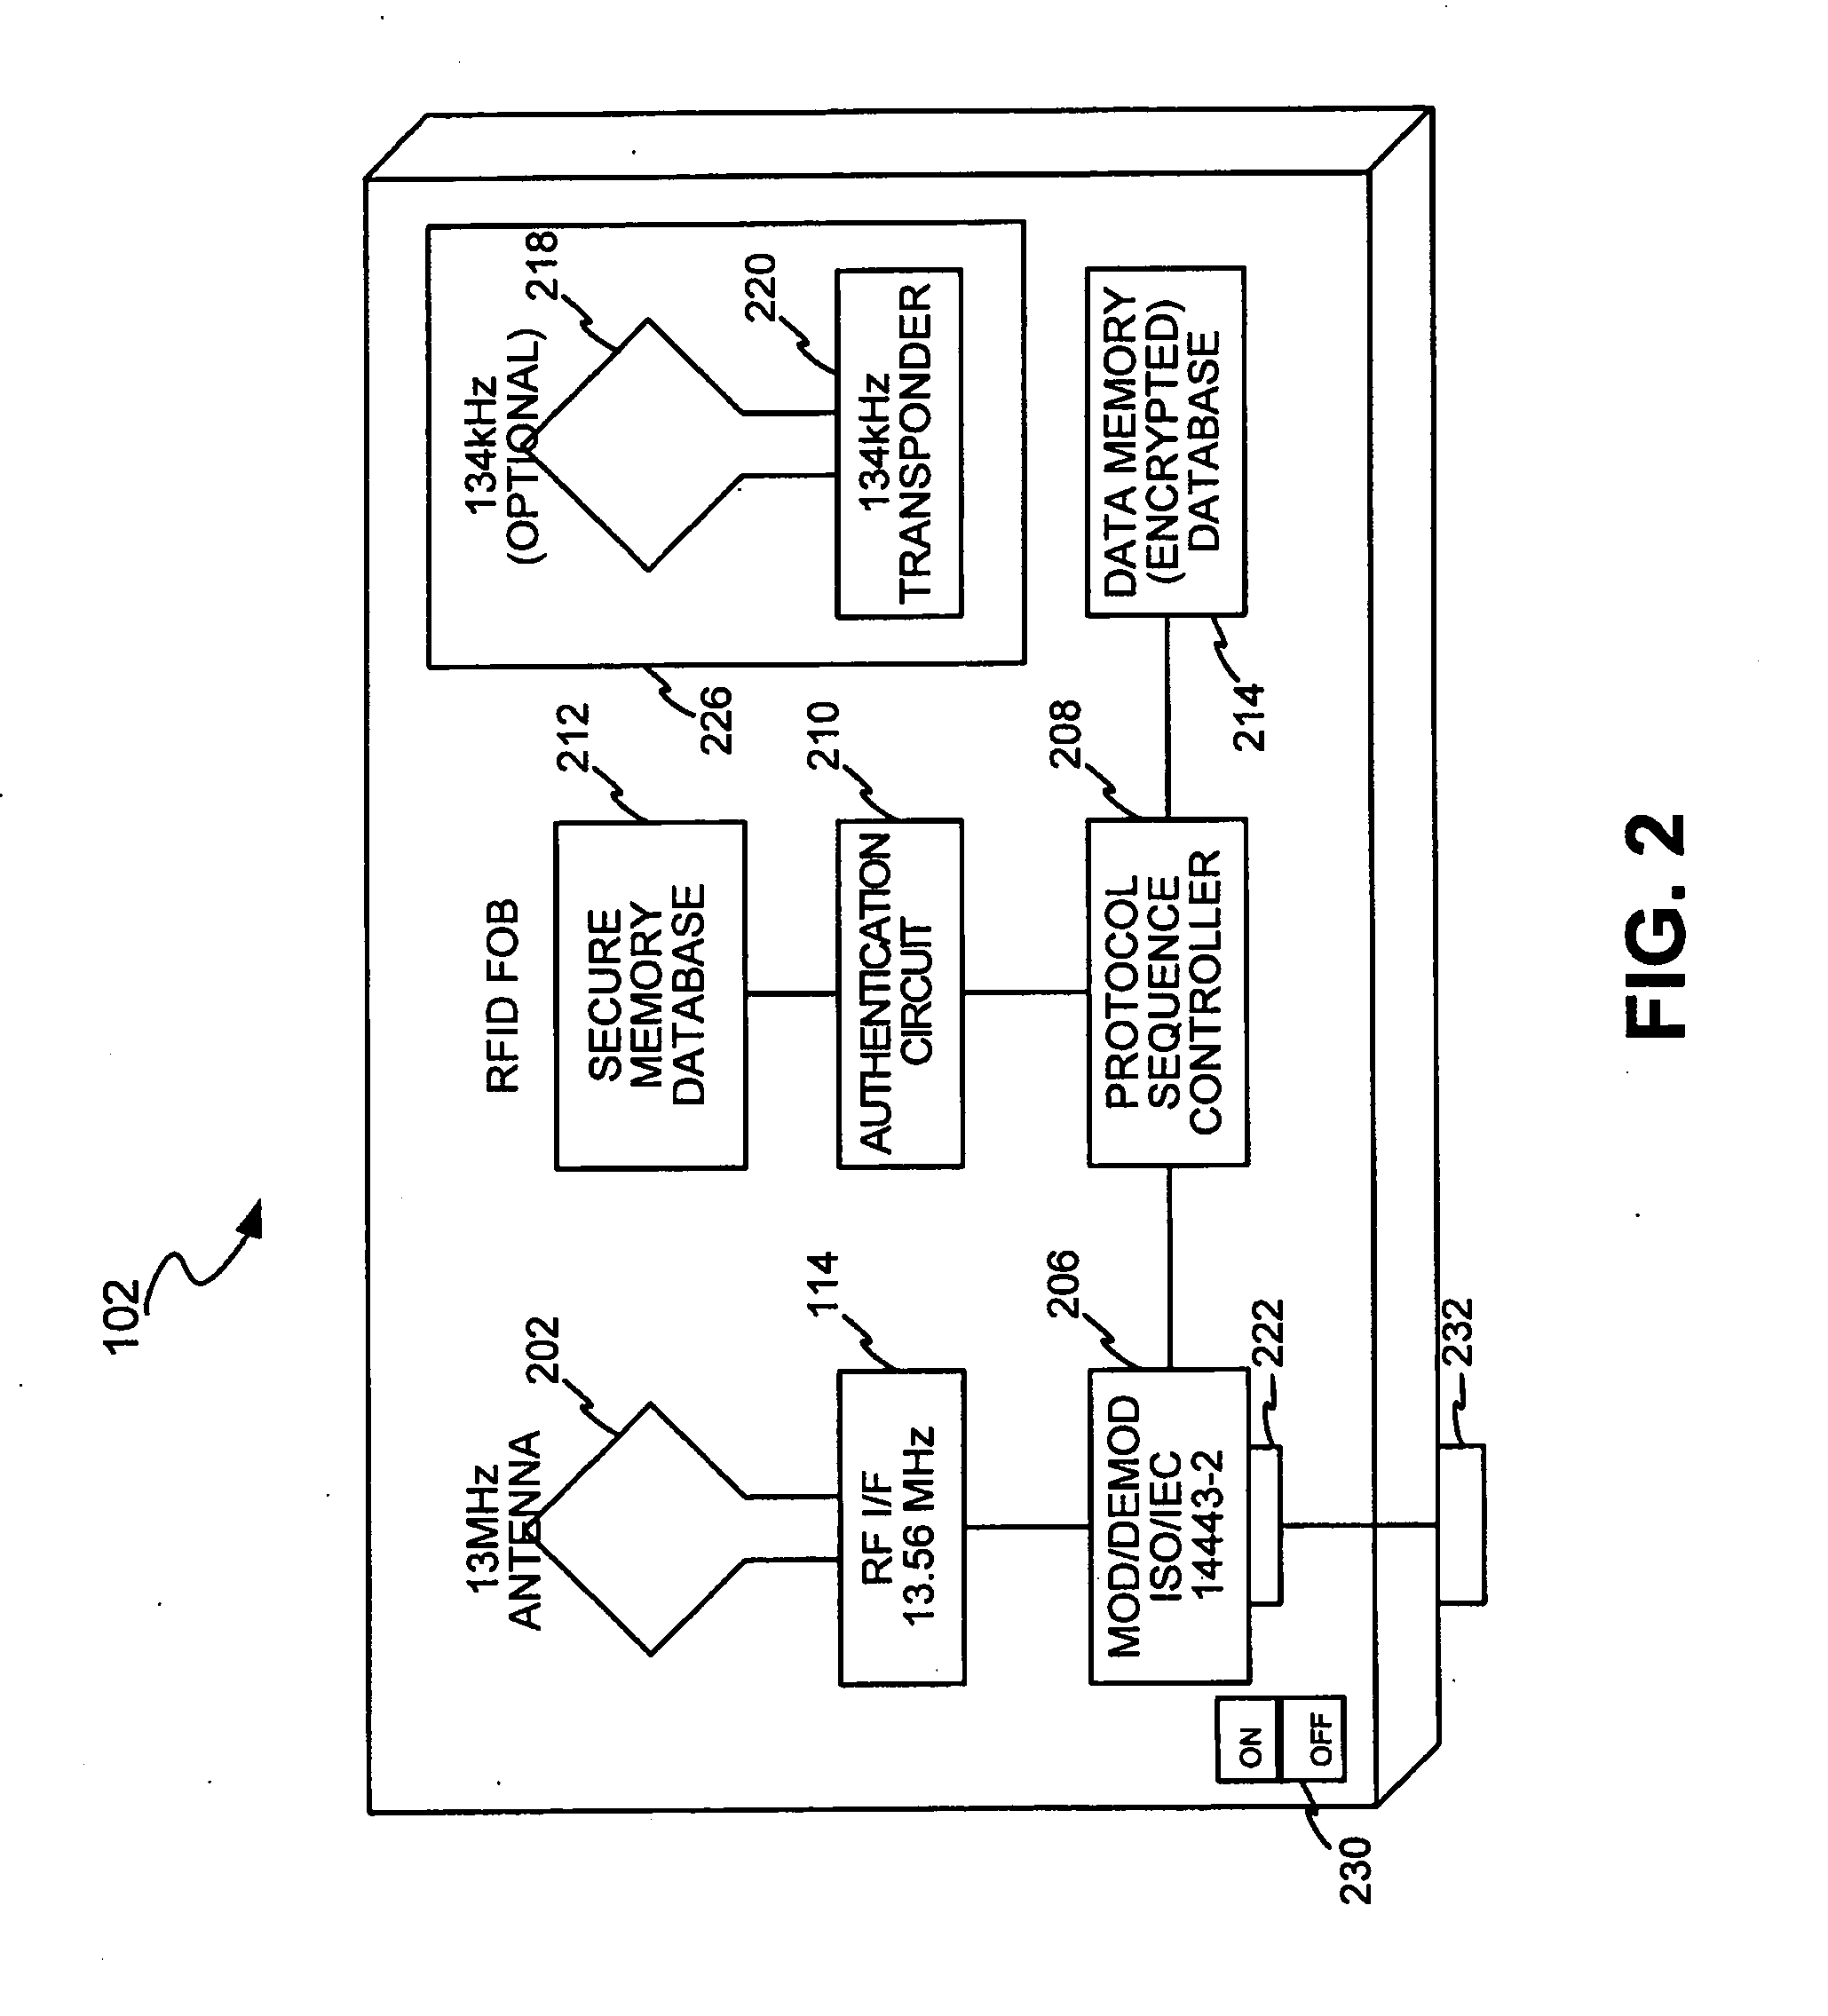 System and method for encoding information in magnetic stripe format for use in radio frequency identification transactions